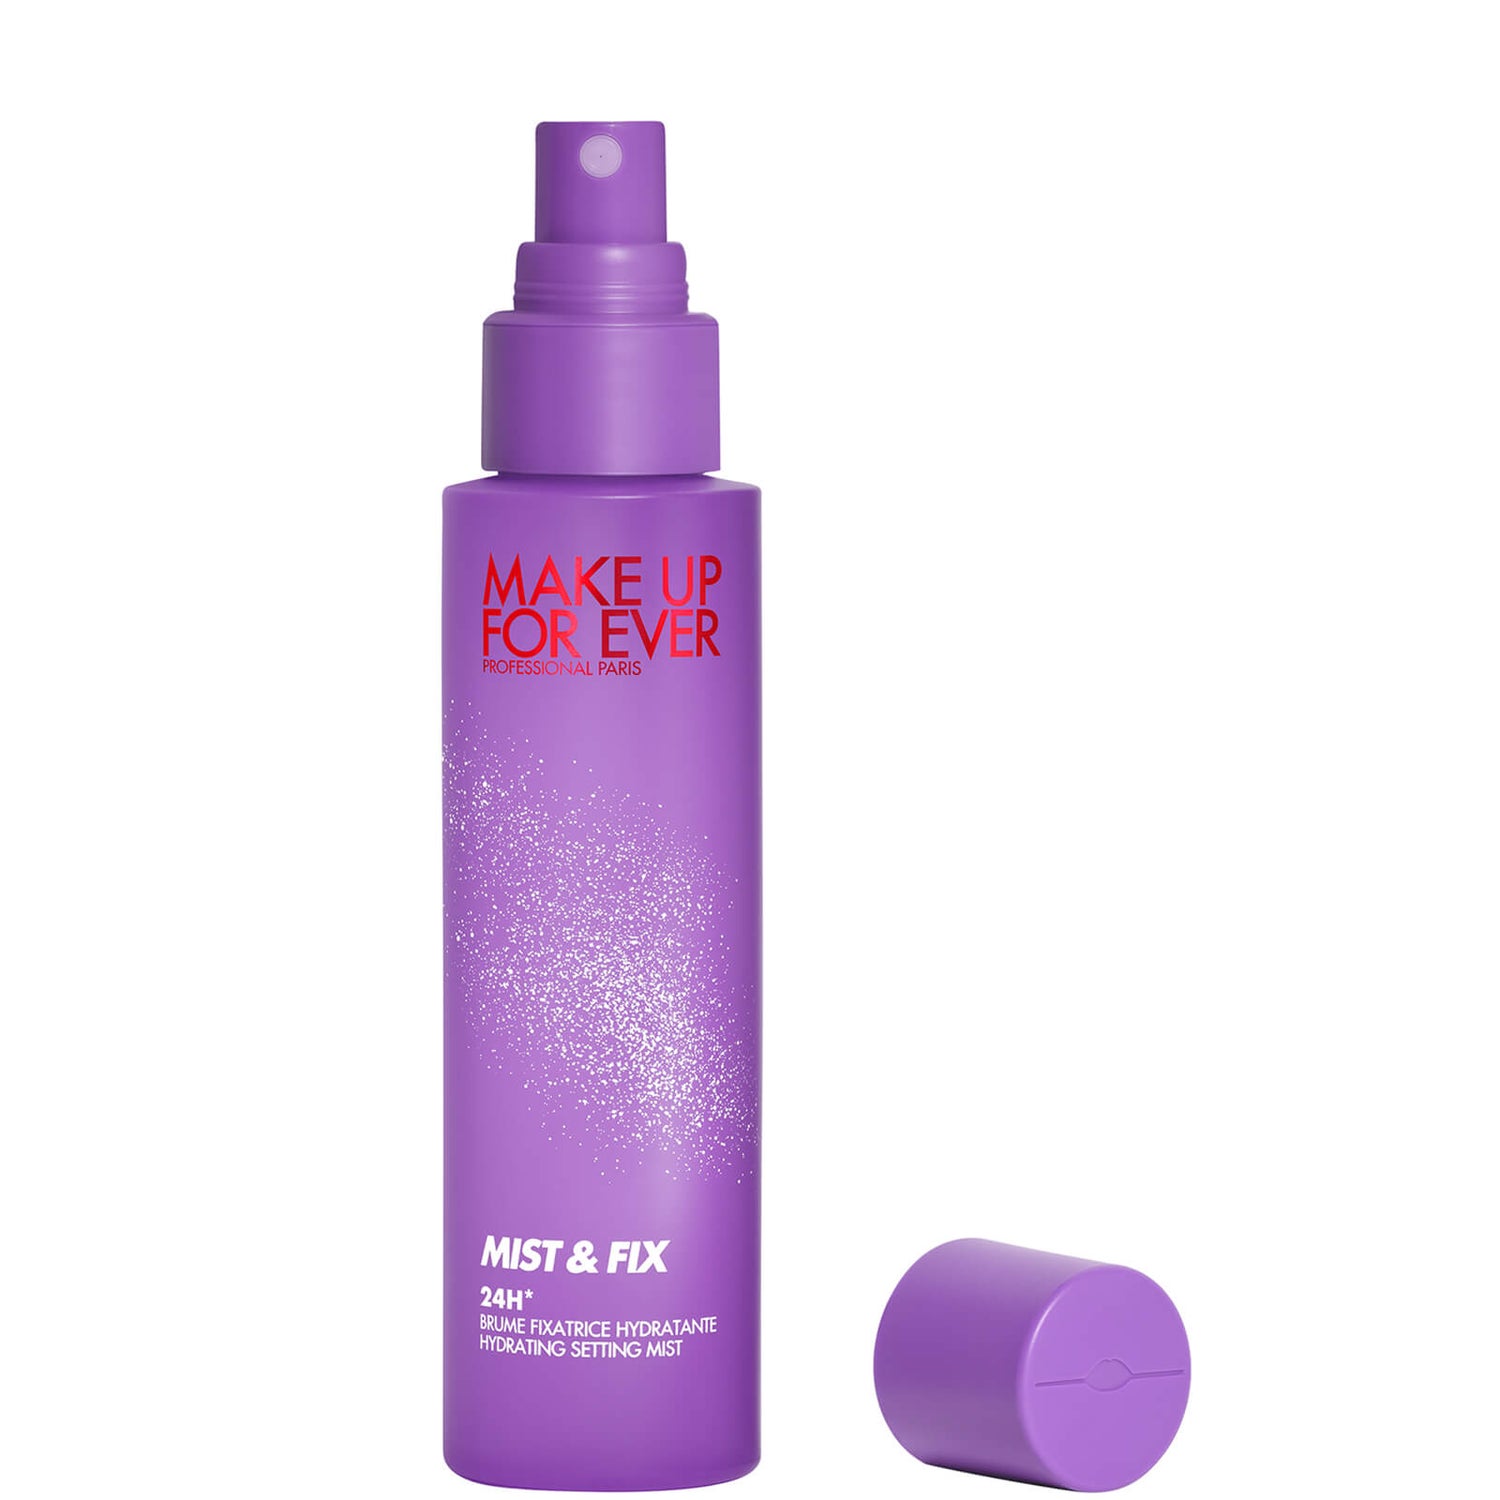 MAKE UP FOR EVER Mist and Fix Holiday Spray 100ml (Worth £28.00)